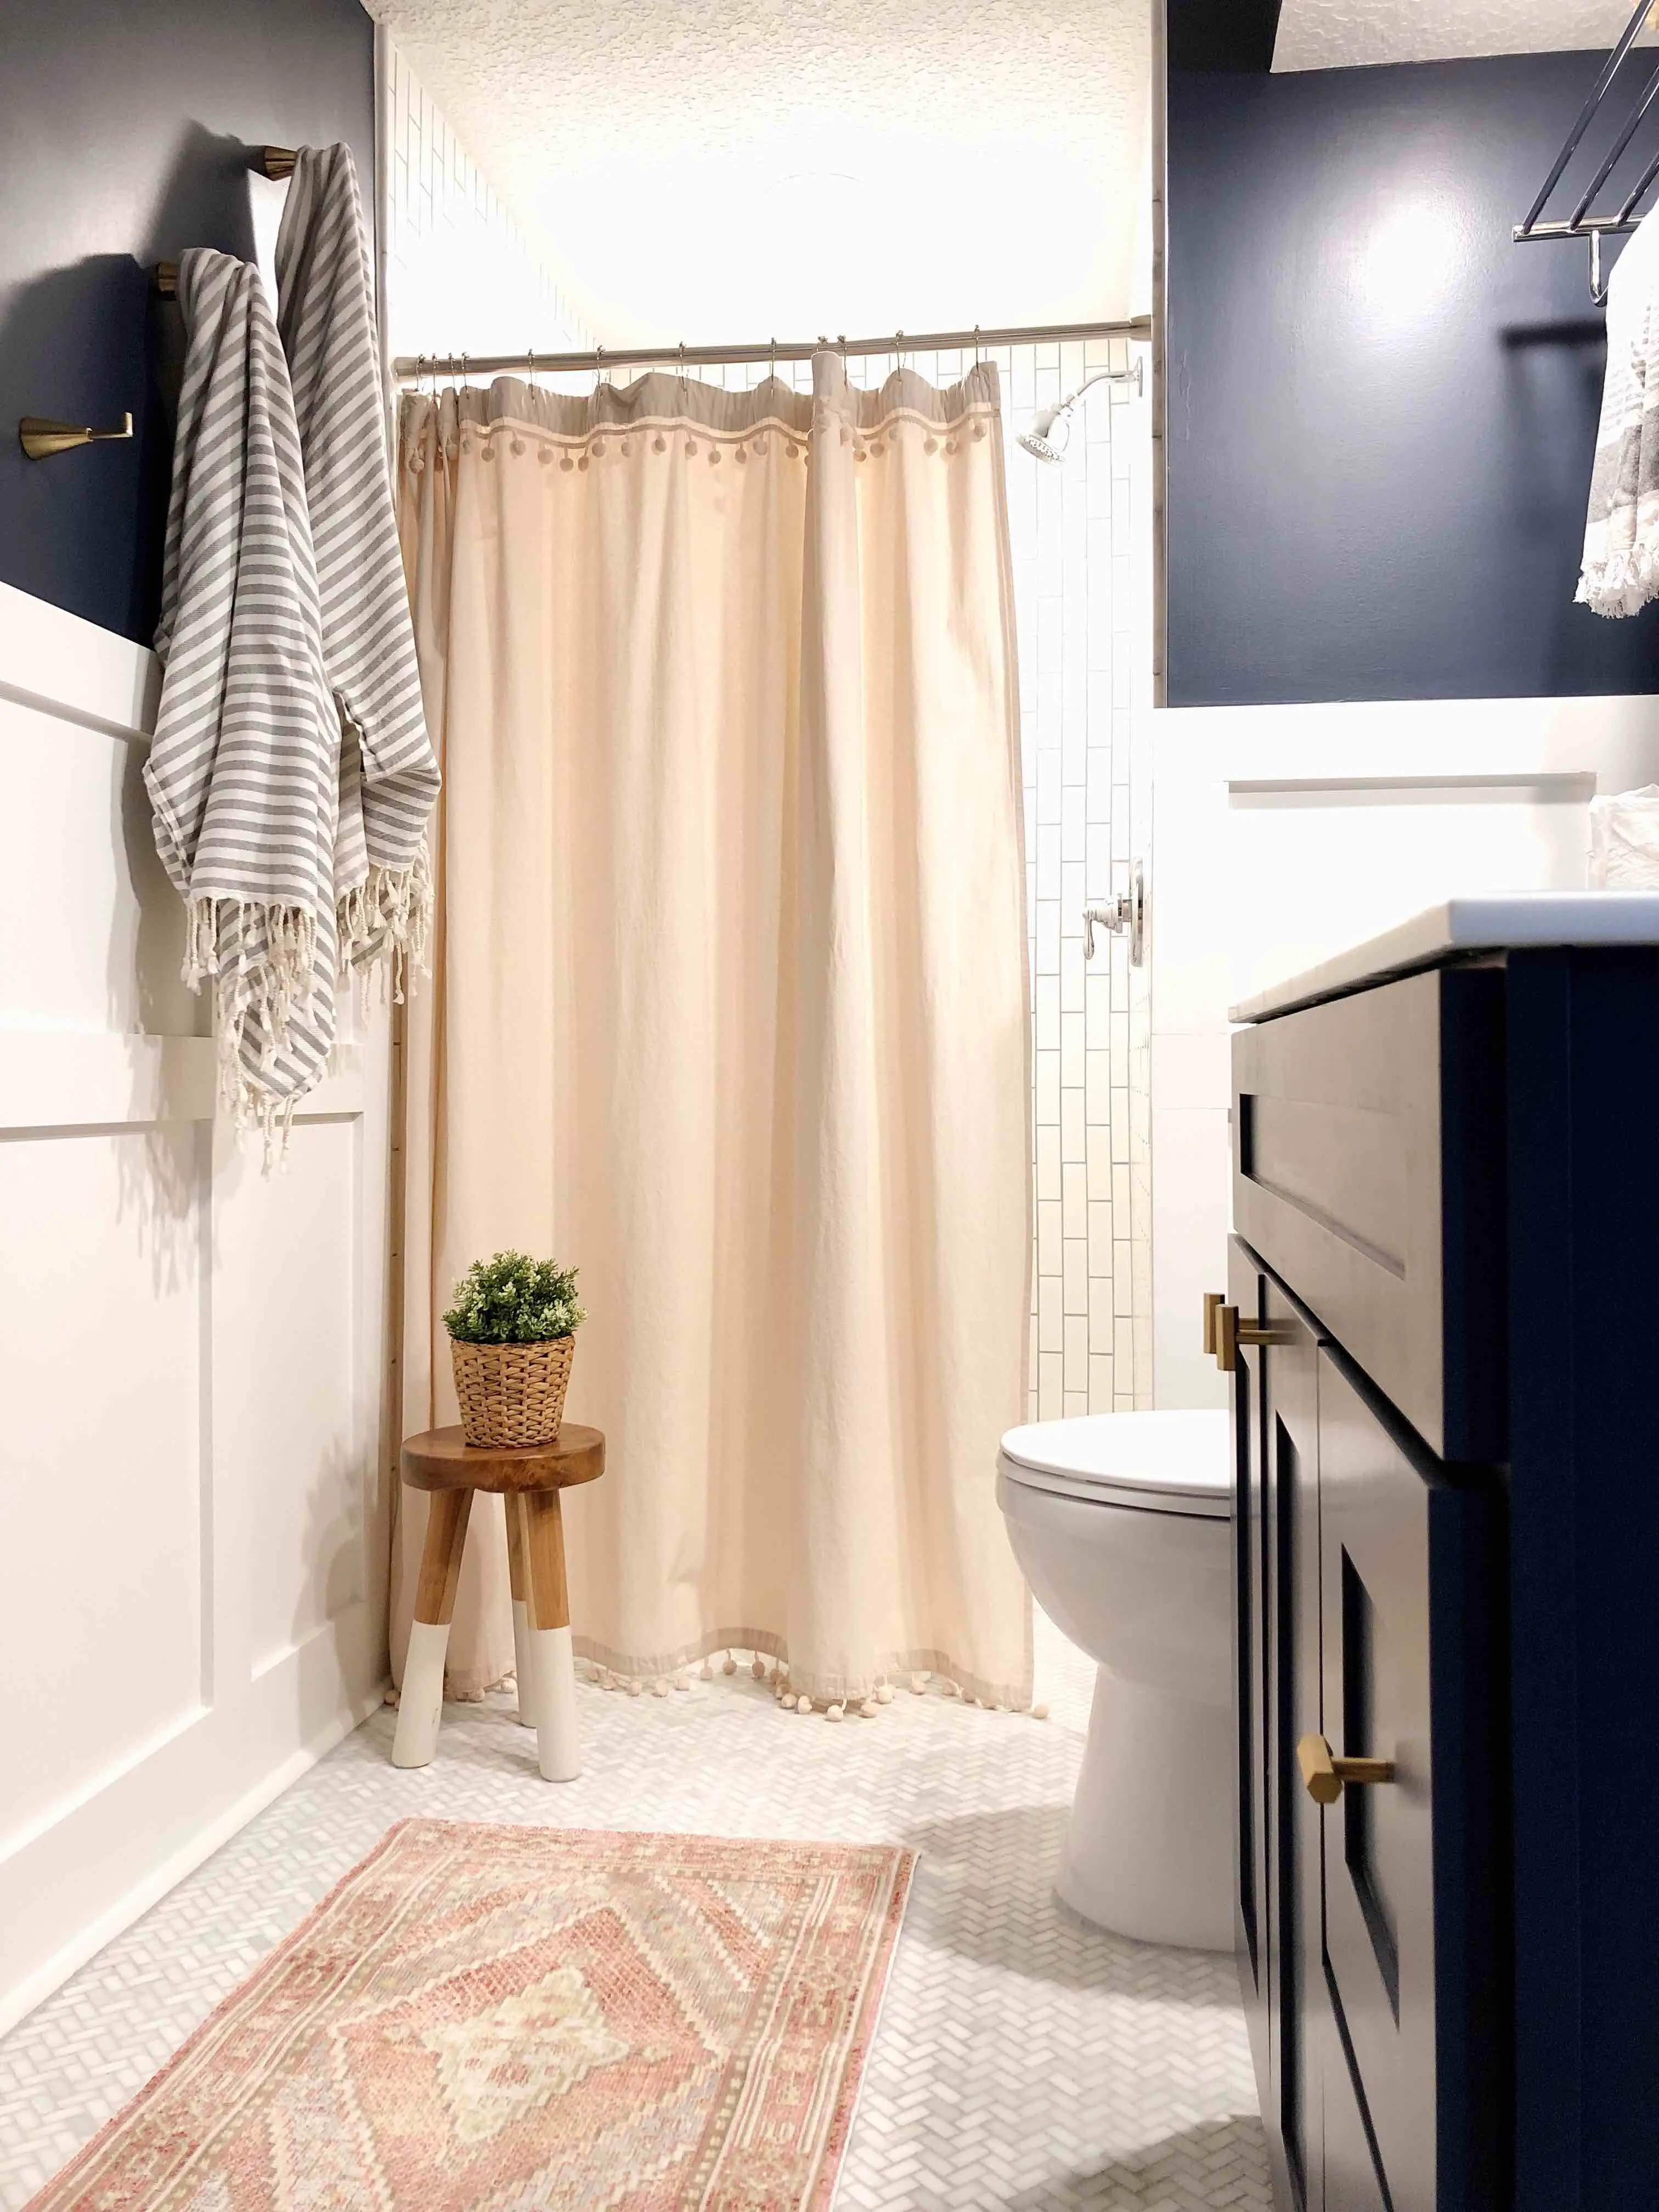 bathroom with pink shower curtain and striped towels